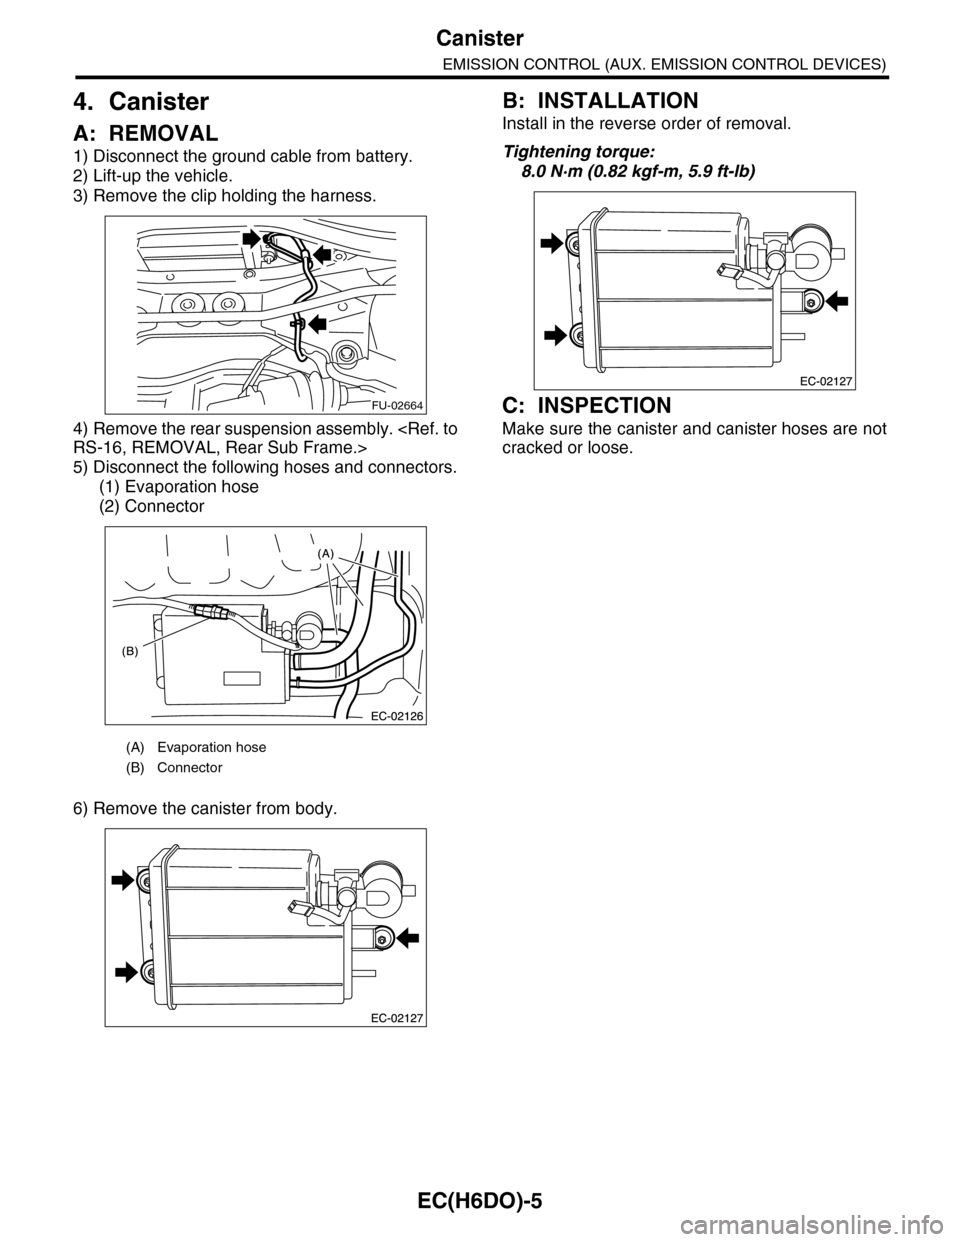 SUBARU TRIBECA 2009 1.G Service Workshop Manual EC(H6DO)-5
Canister
EMISSION CONTROL (AUX. EMISSION CONTROL DEVICES)
4. Canister
A: REMOVAL
1) Disconnect the ground cable from battery.
2) Lift-up the vehicle.
3) Remove the clip holding the harness.